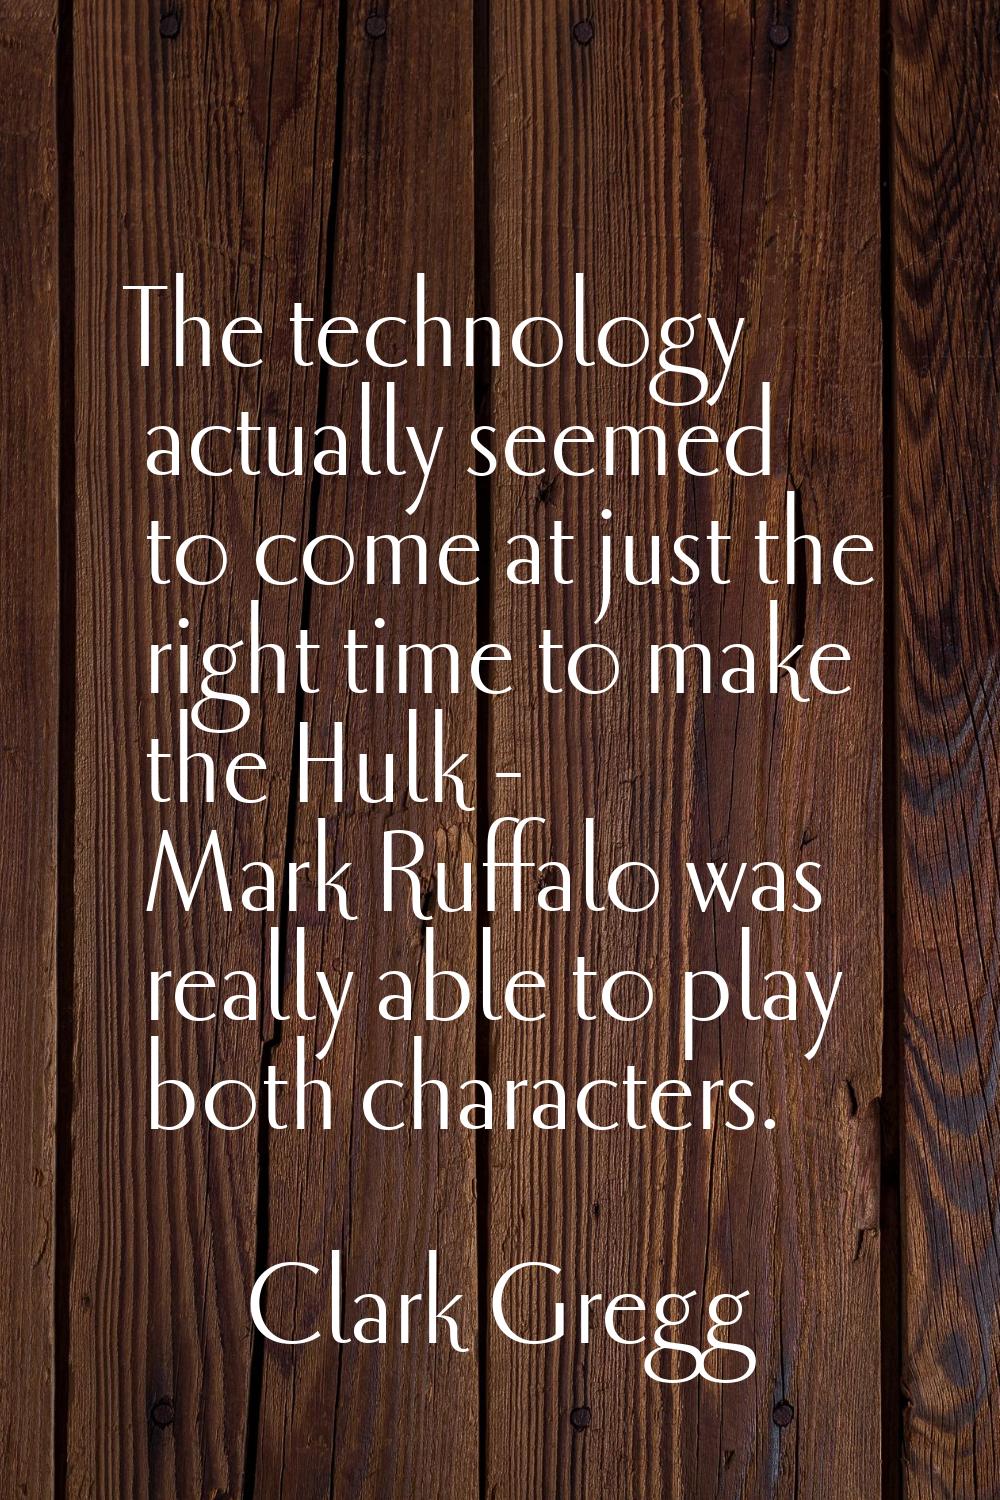 The technology actually seemed to come at just the right time to make the Hulk - Mark Ruffalo was r